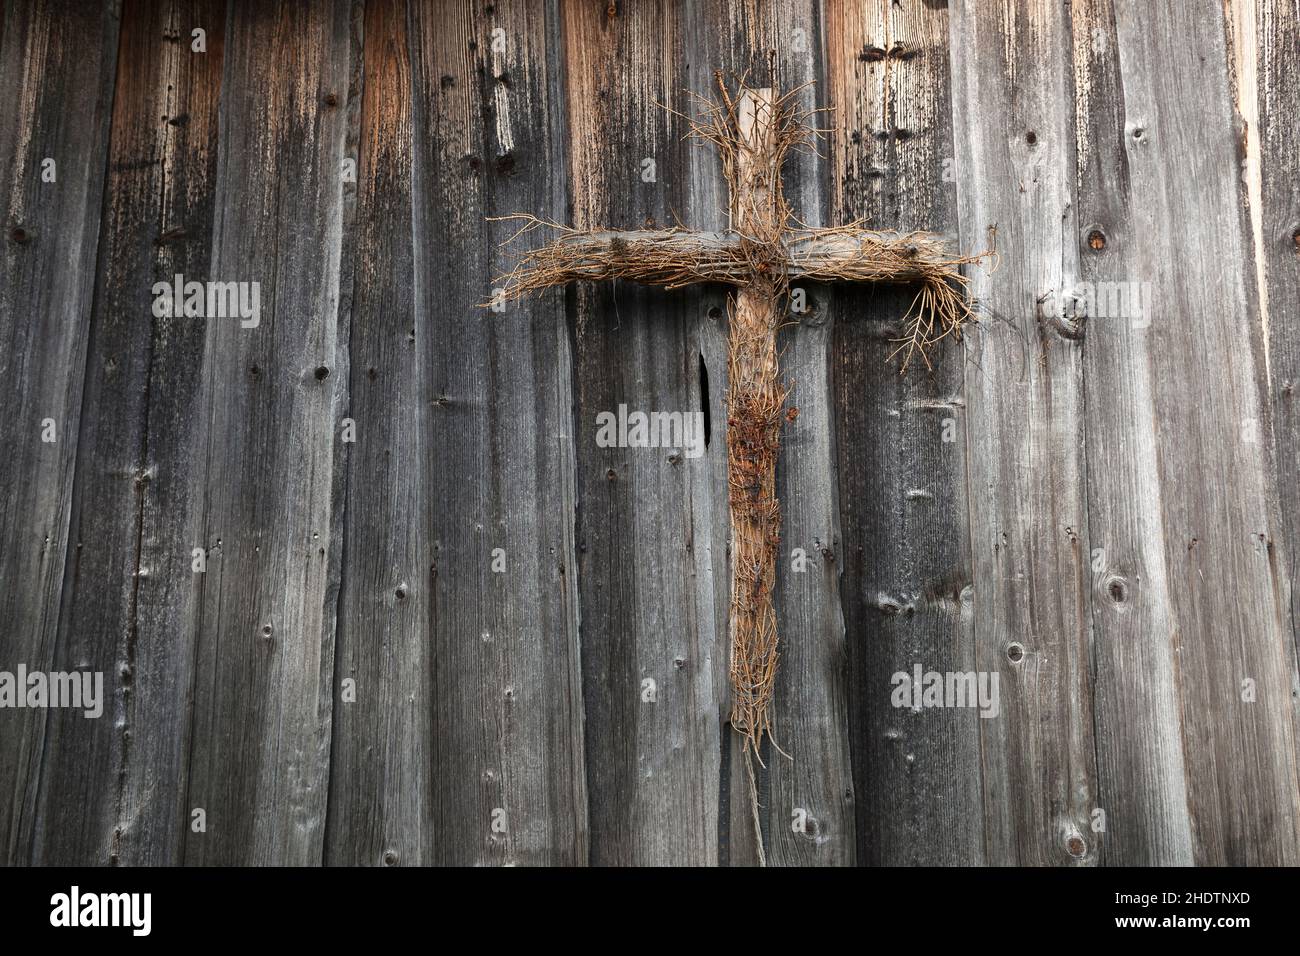 439 Rustic Wooden Crosses Stock Photos, High-Res Pictures, and Images -  Getty Images